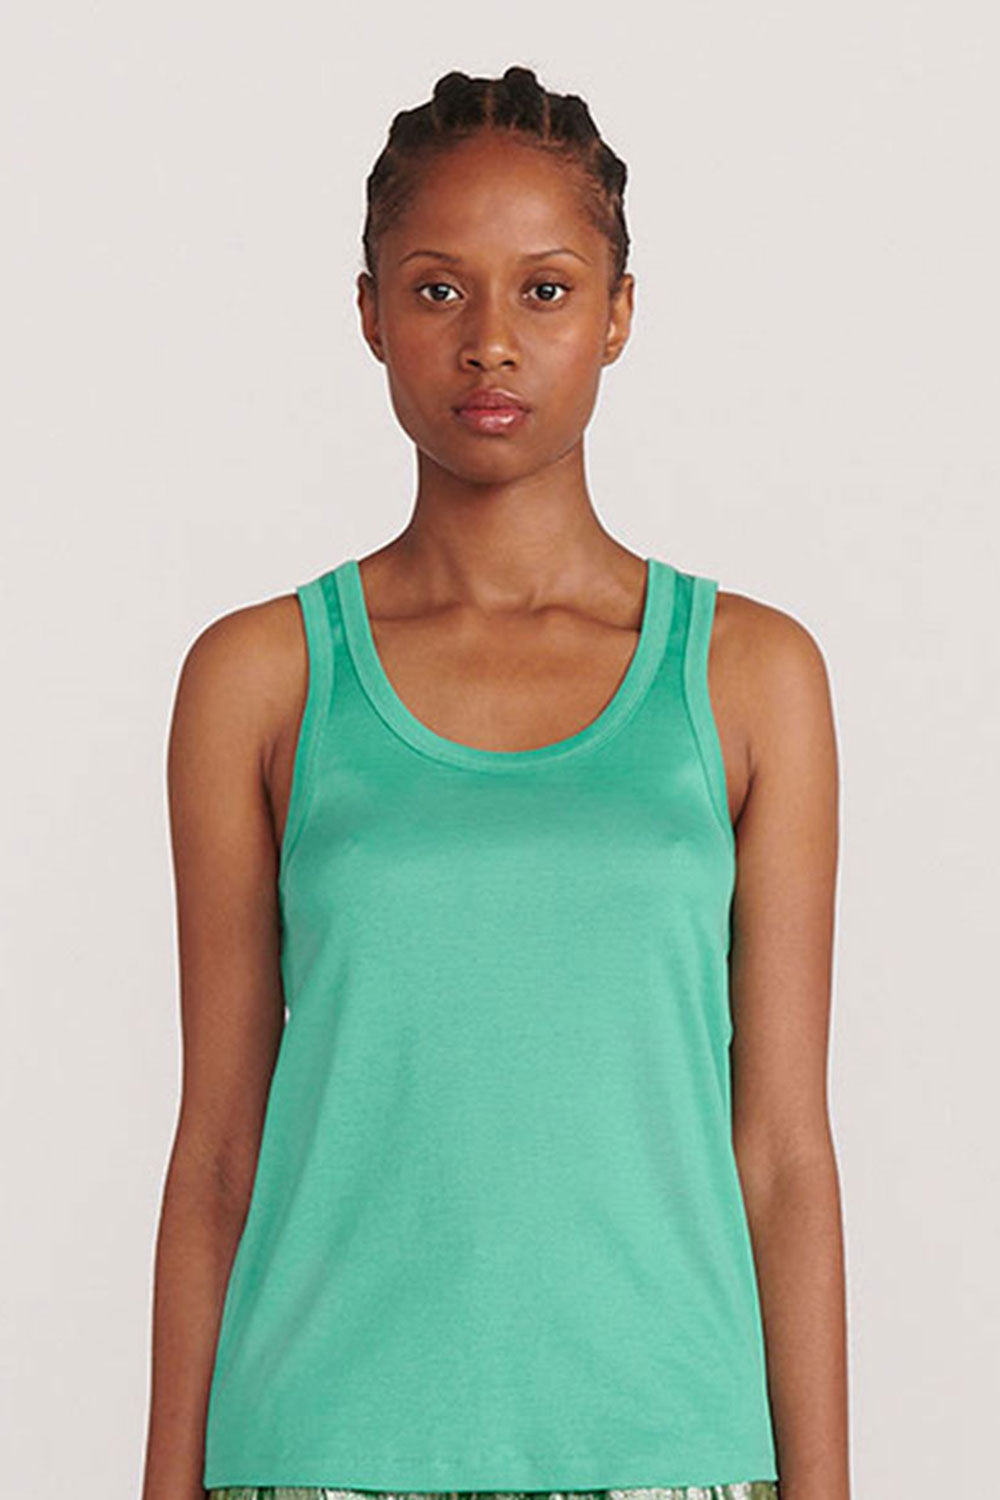 Indress Cacao Cotton Tank Top Turquoise - flora and henri